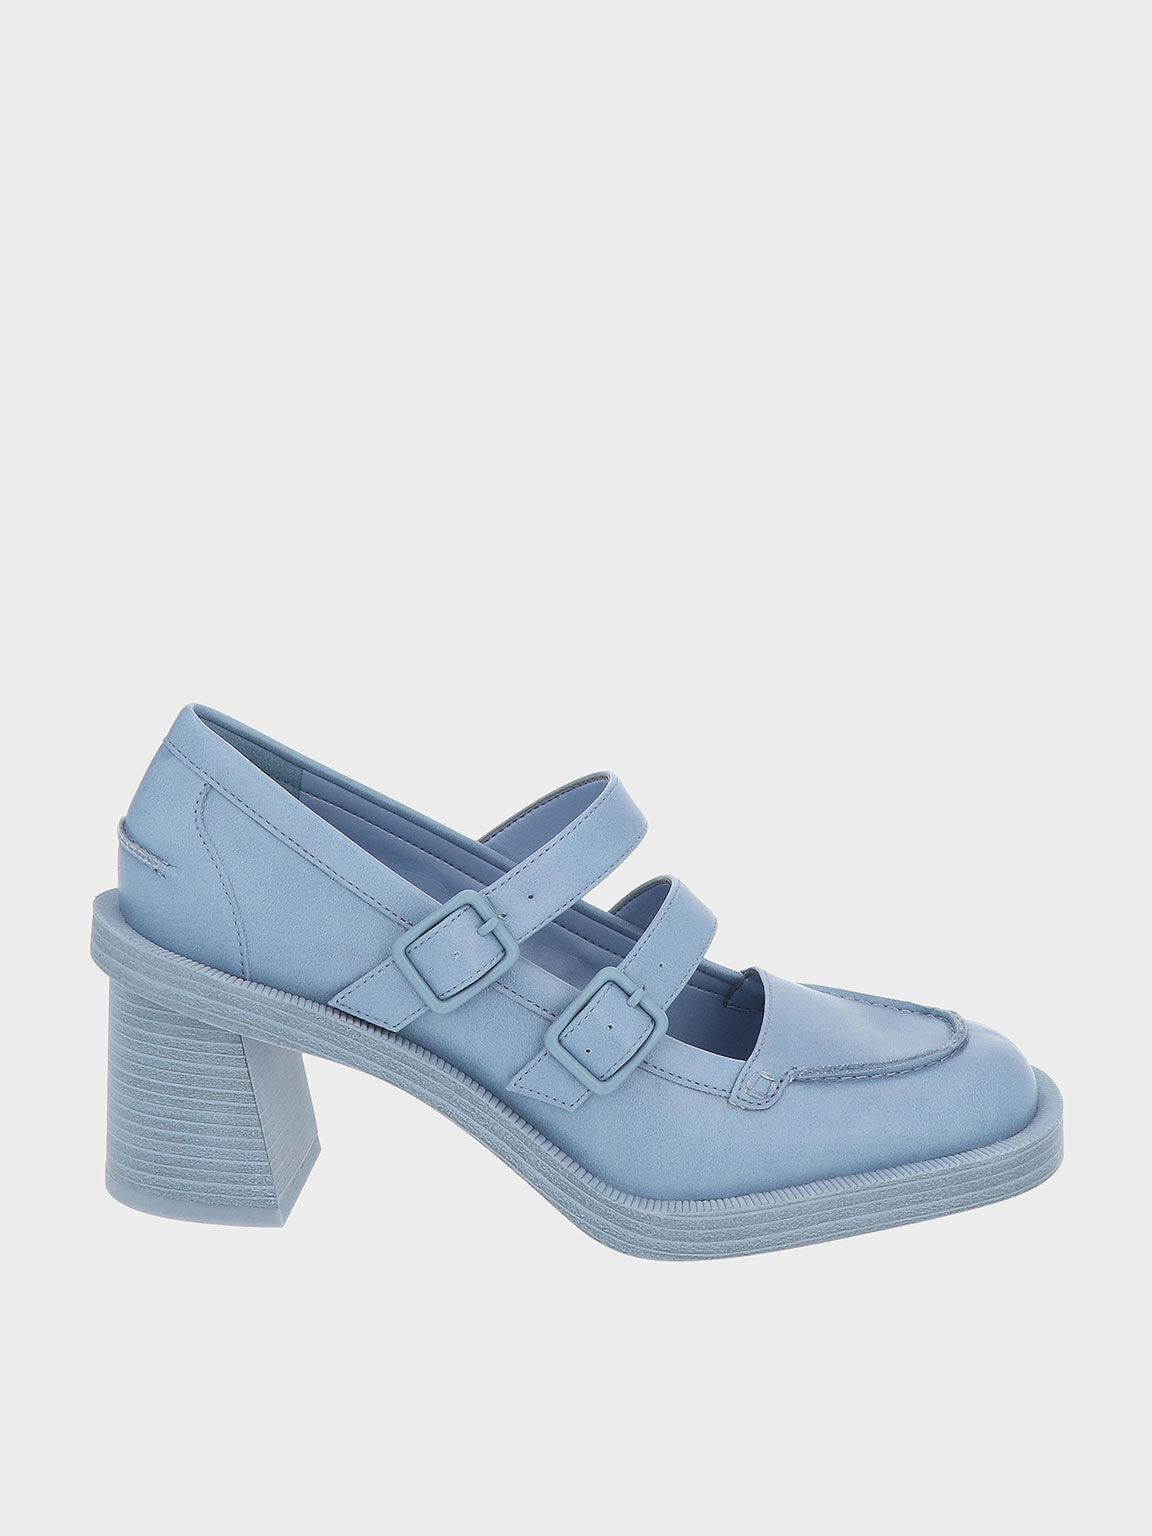 Haisley Double-Strap Mary Jane Pumps, Blue, hi-res